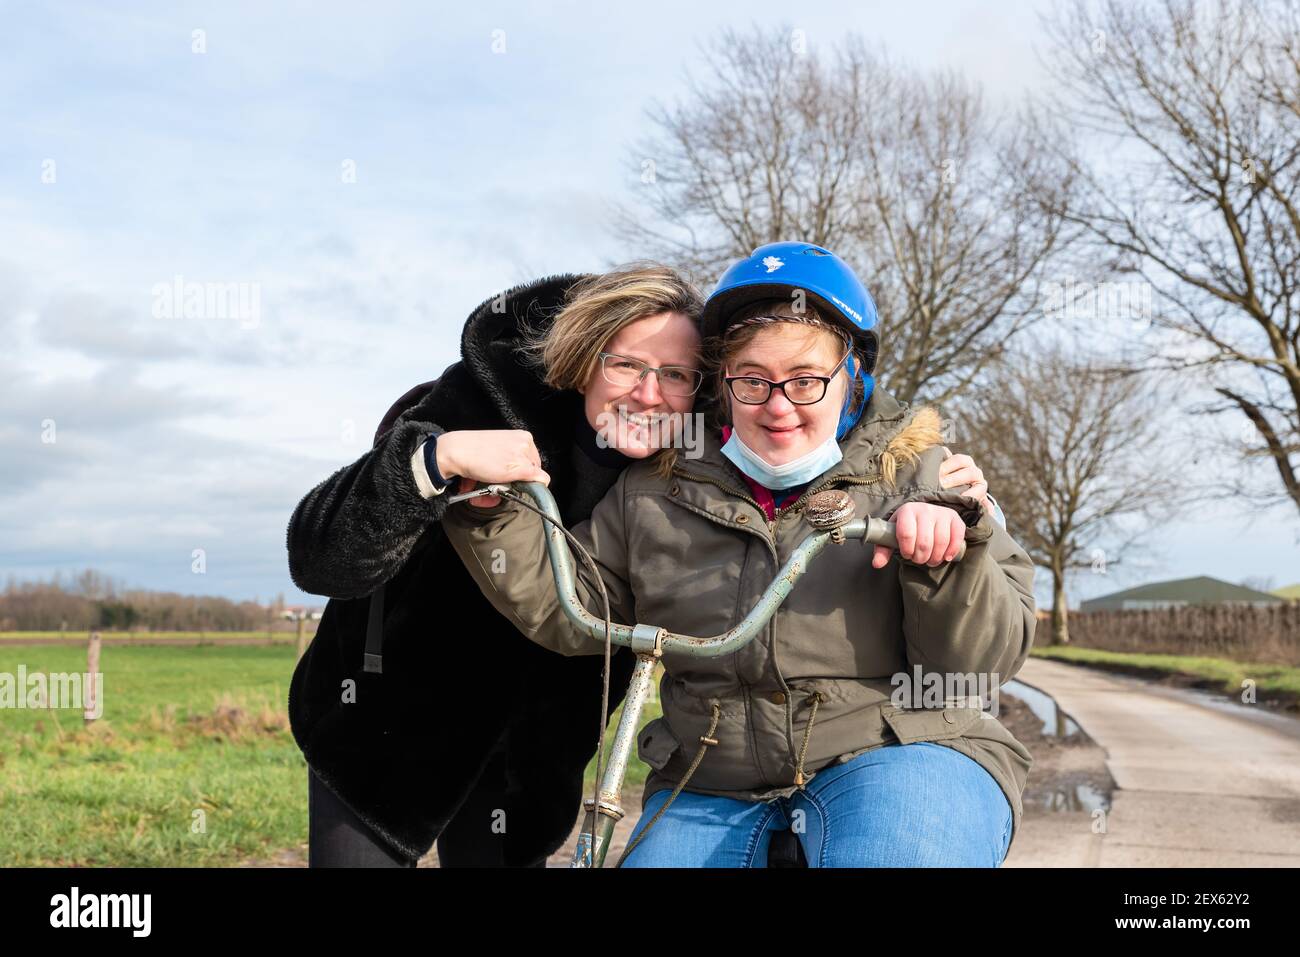 Portrait of a happy Down Syndrome woman of 37 years old smiling on her bicycle Stock Photo